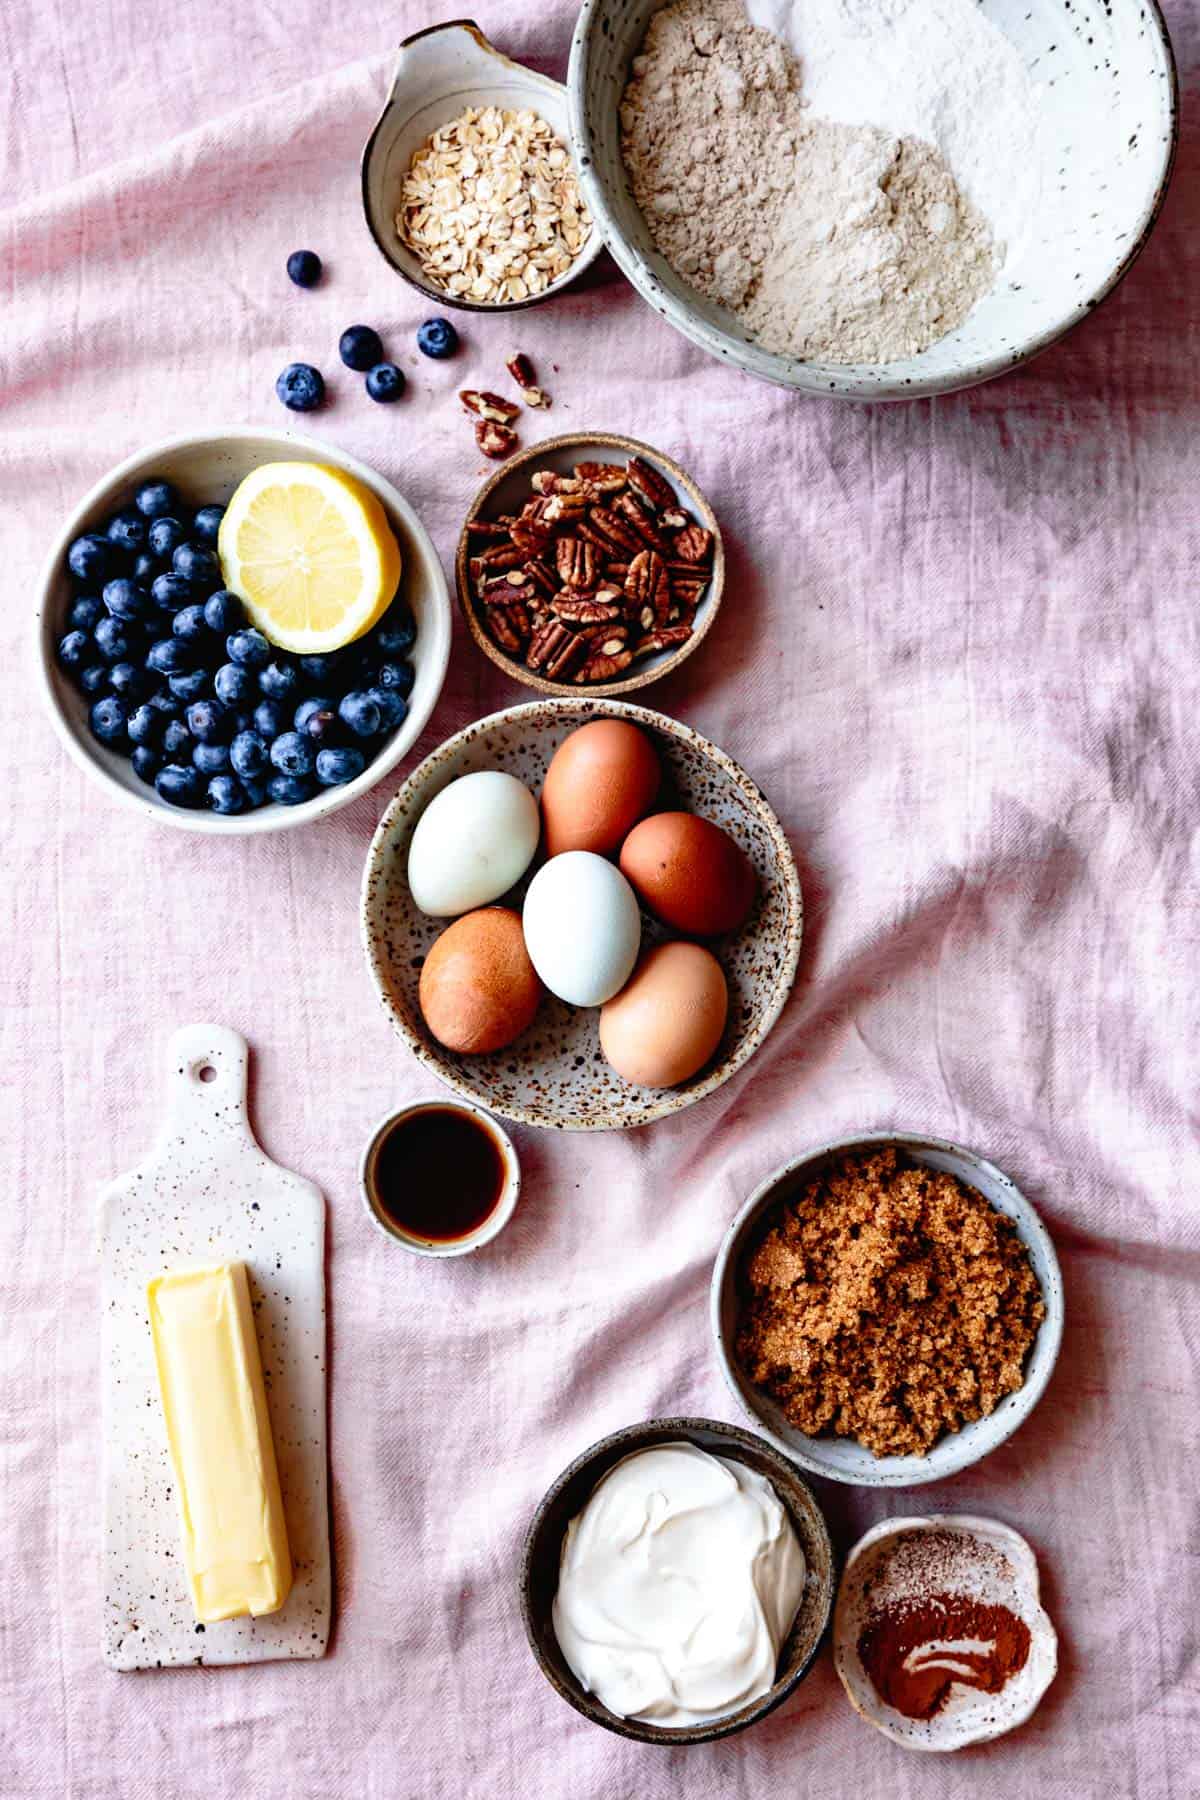 Ingredients for Gluten-Free Blueberry Coffee Cake recipe